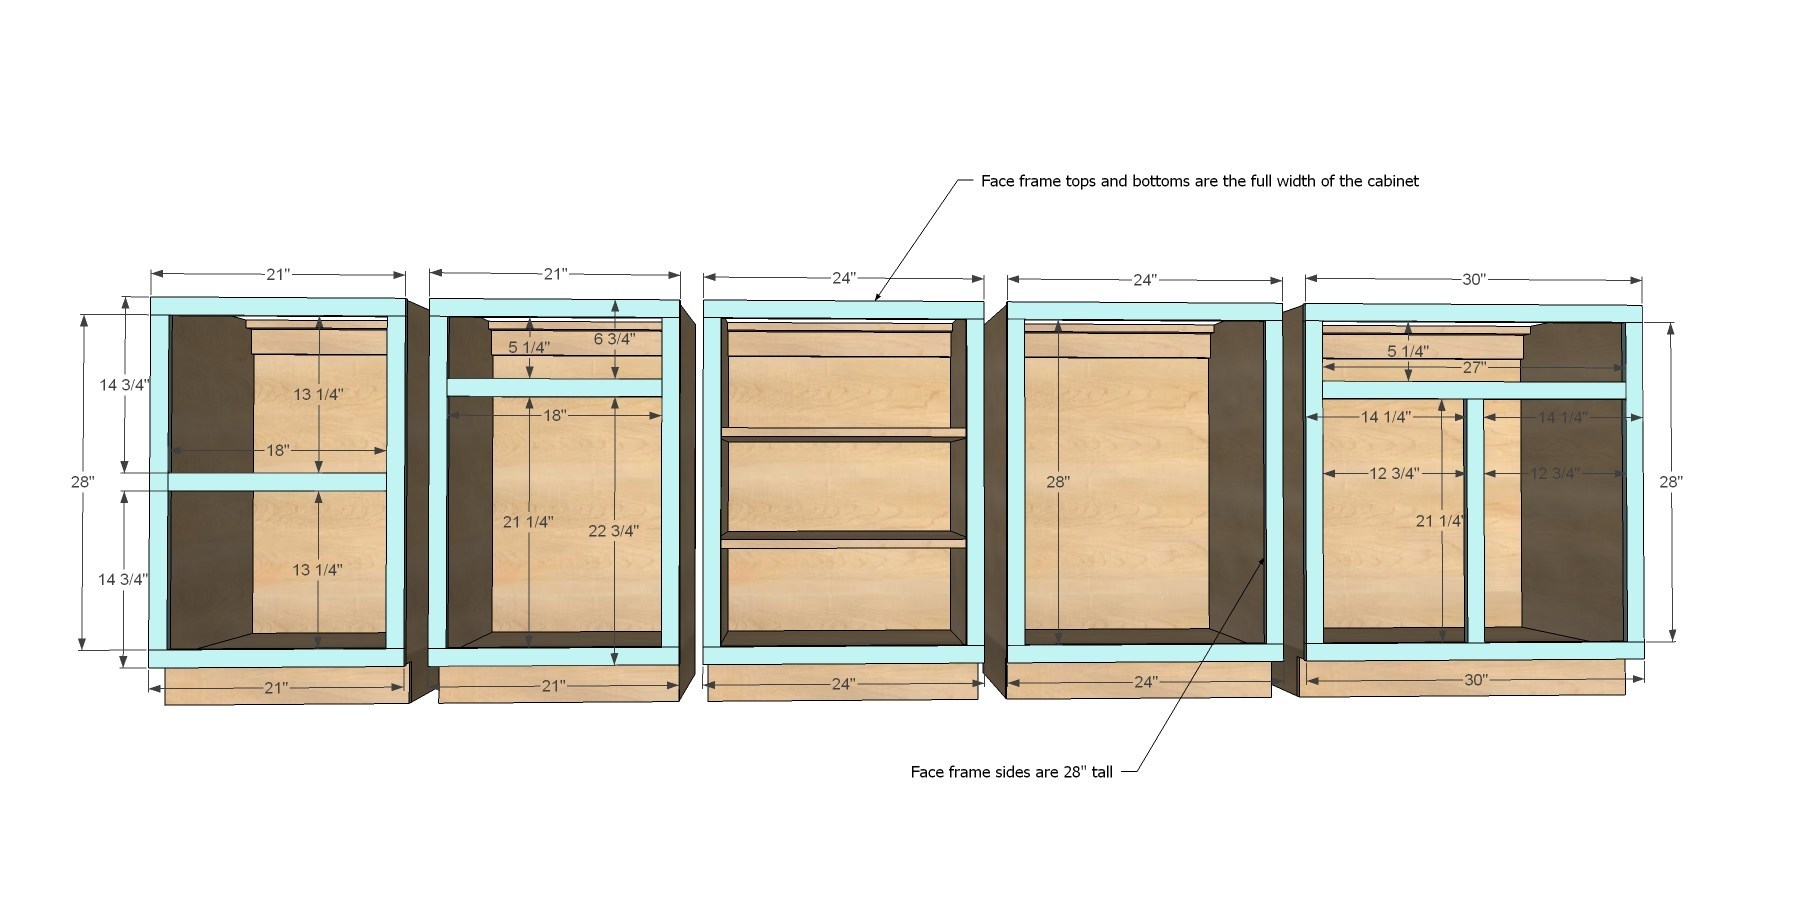 How To Build A Kitchen Cabinet A Step By Step Guide For Beginners ...